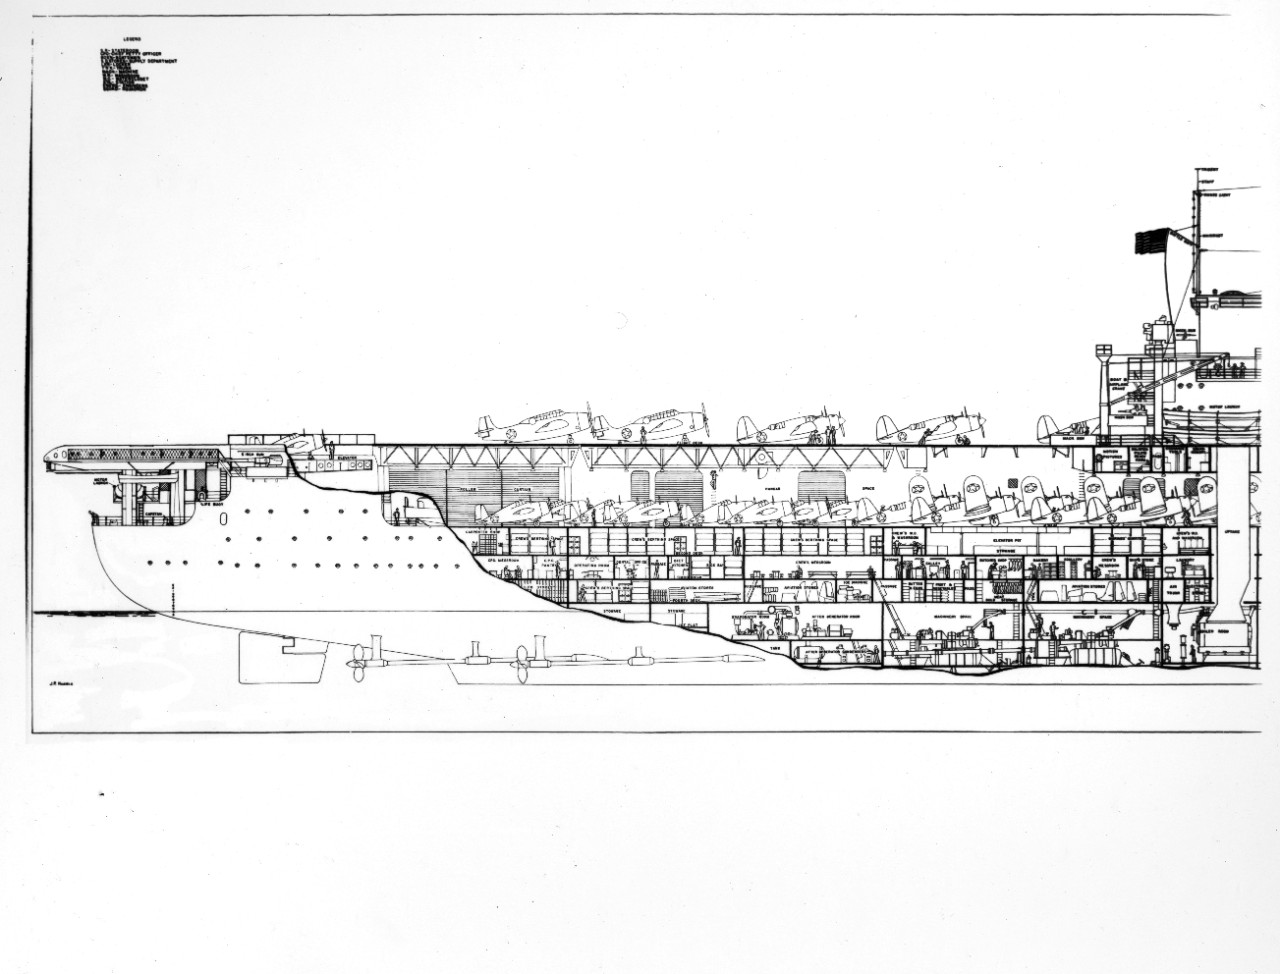 Photo #: 80-G-703026  &quot;Typical Aircraft Carrier&quot;